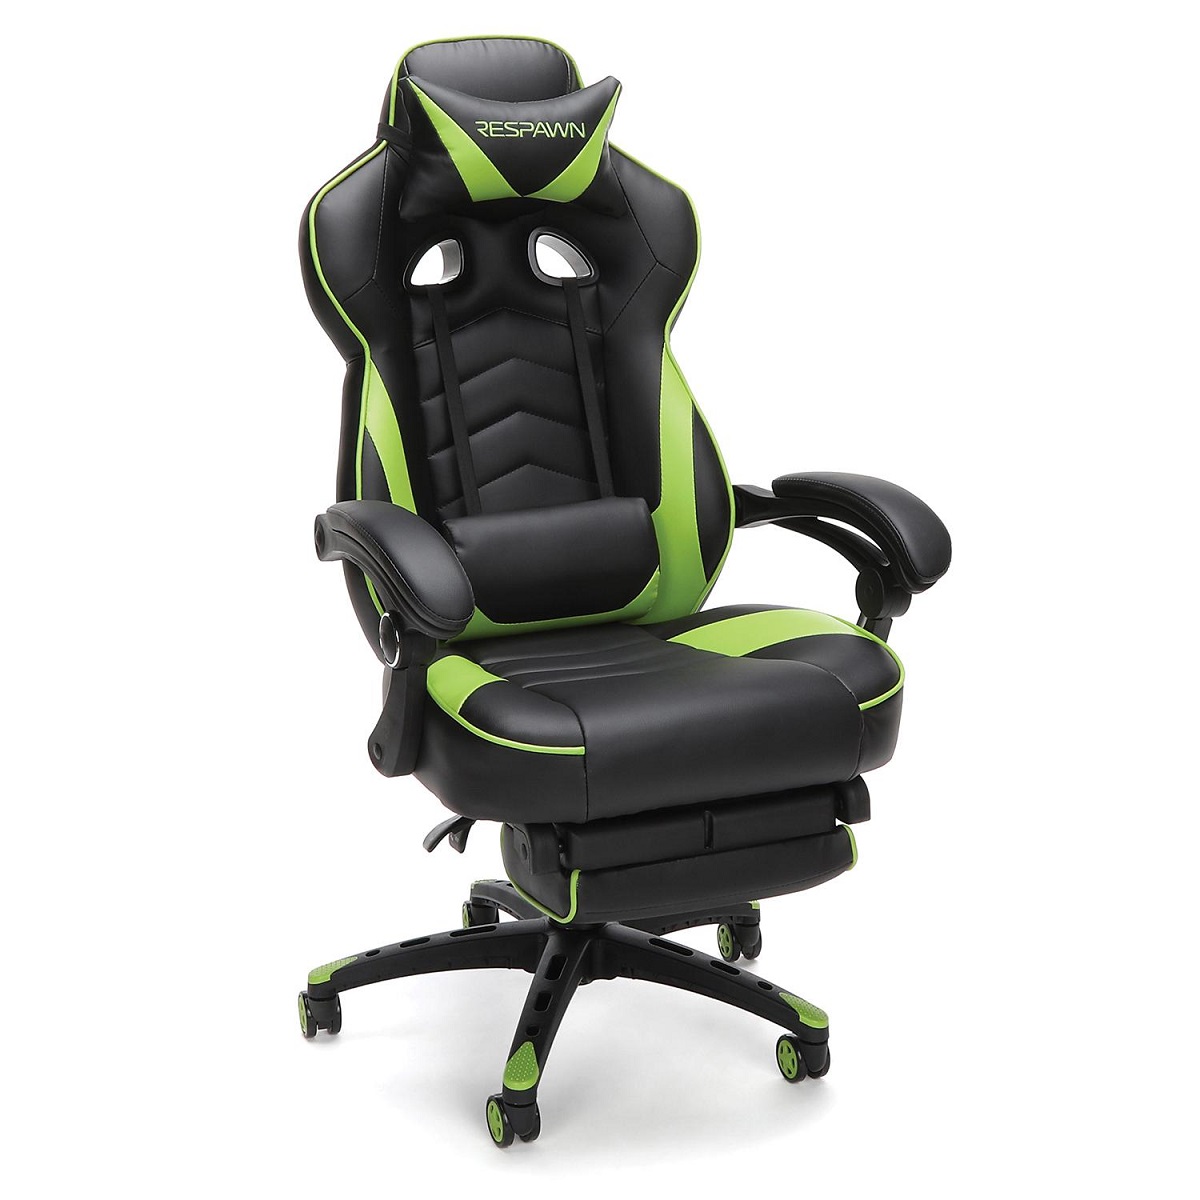 Respawn S110 Racing-Style Gaming Chair $119.98 (20% off) @ Sam's Club